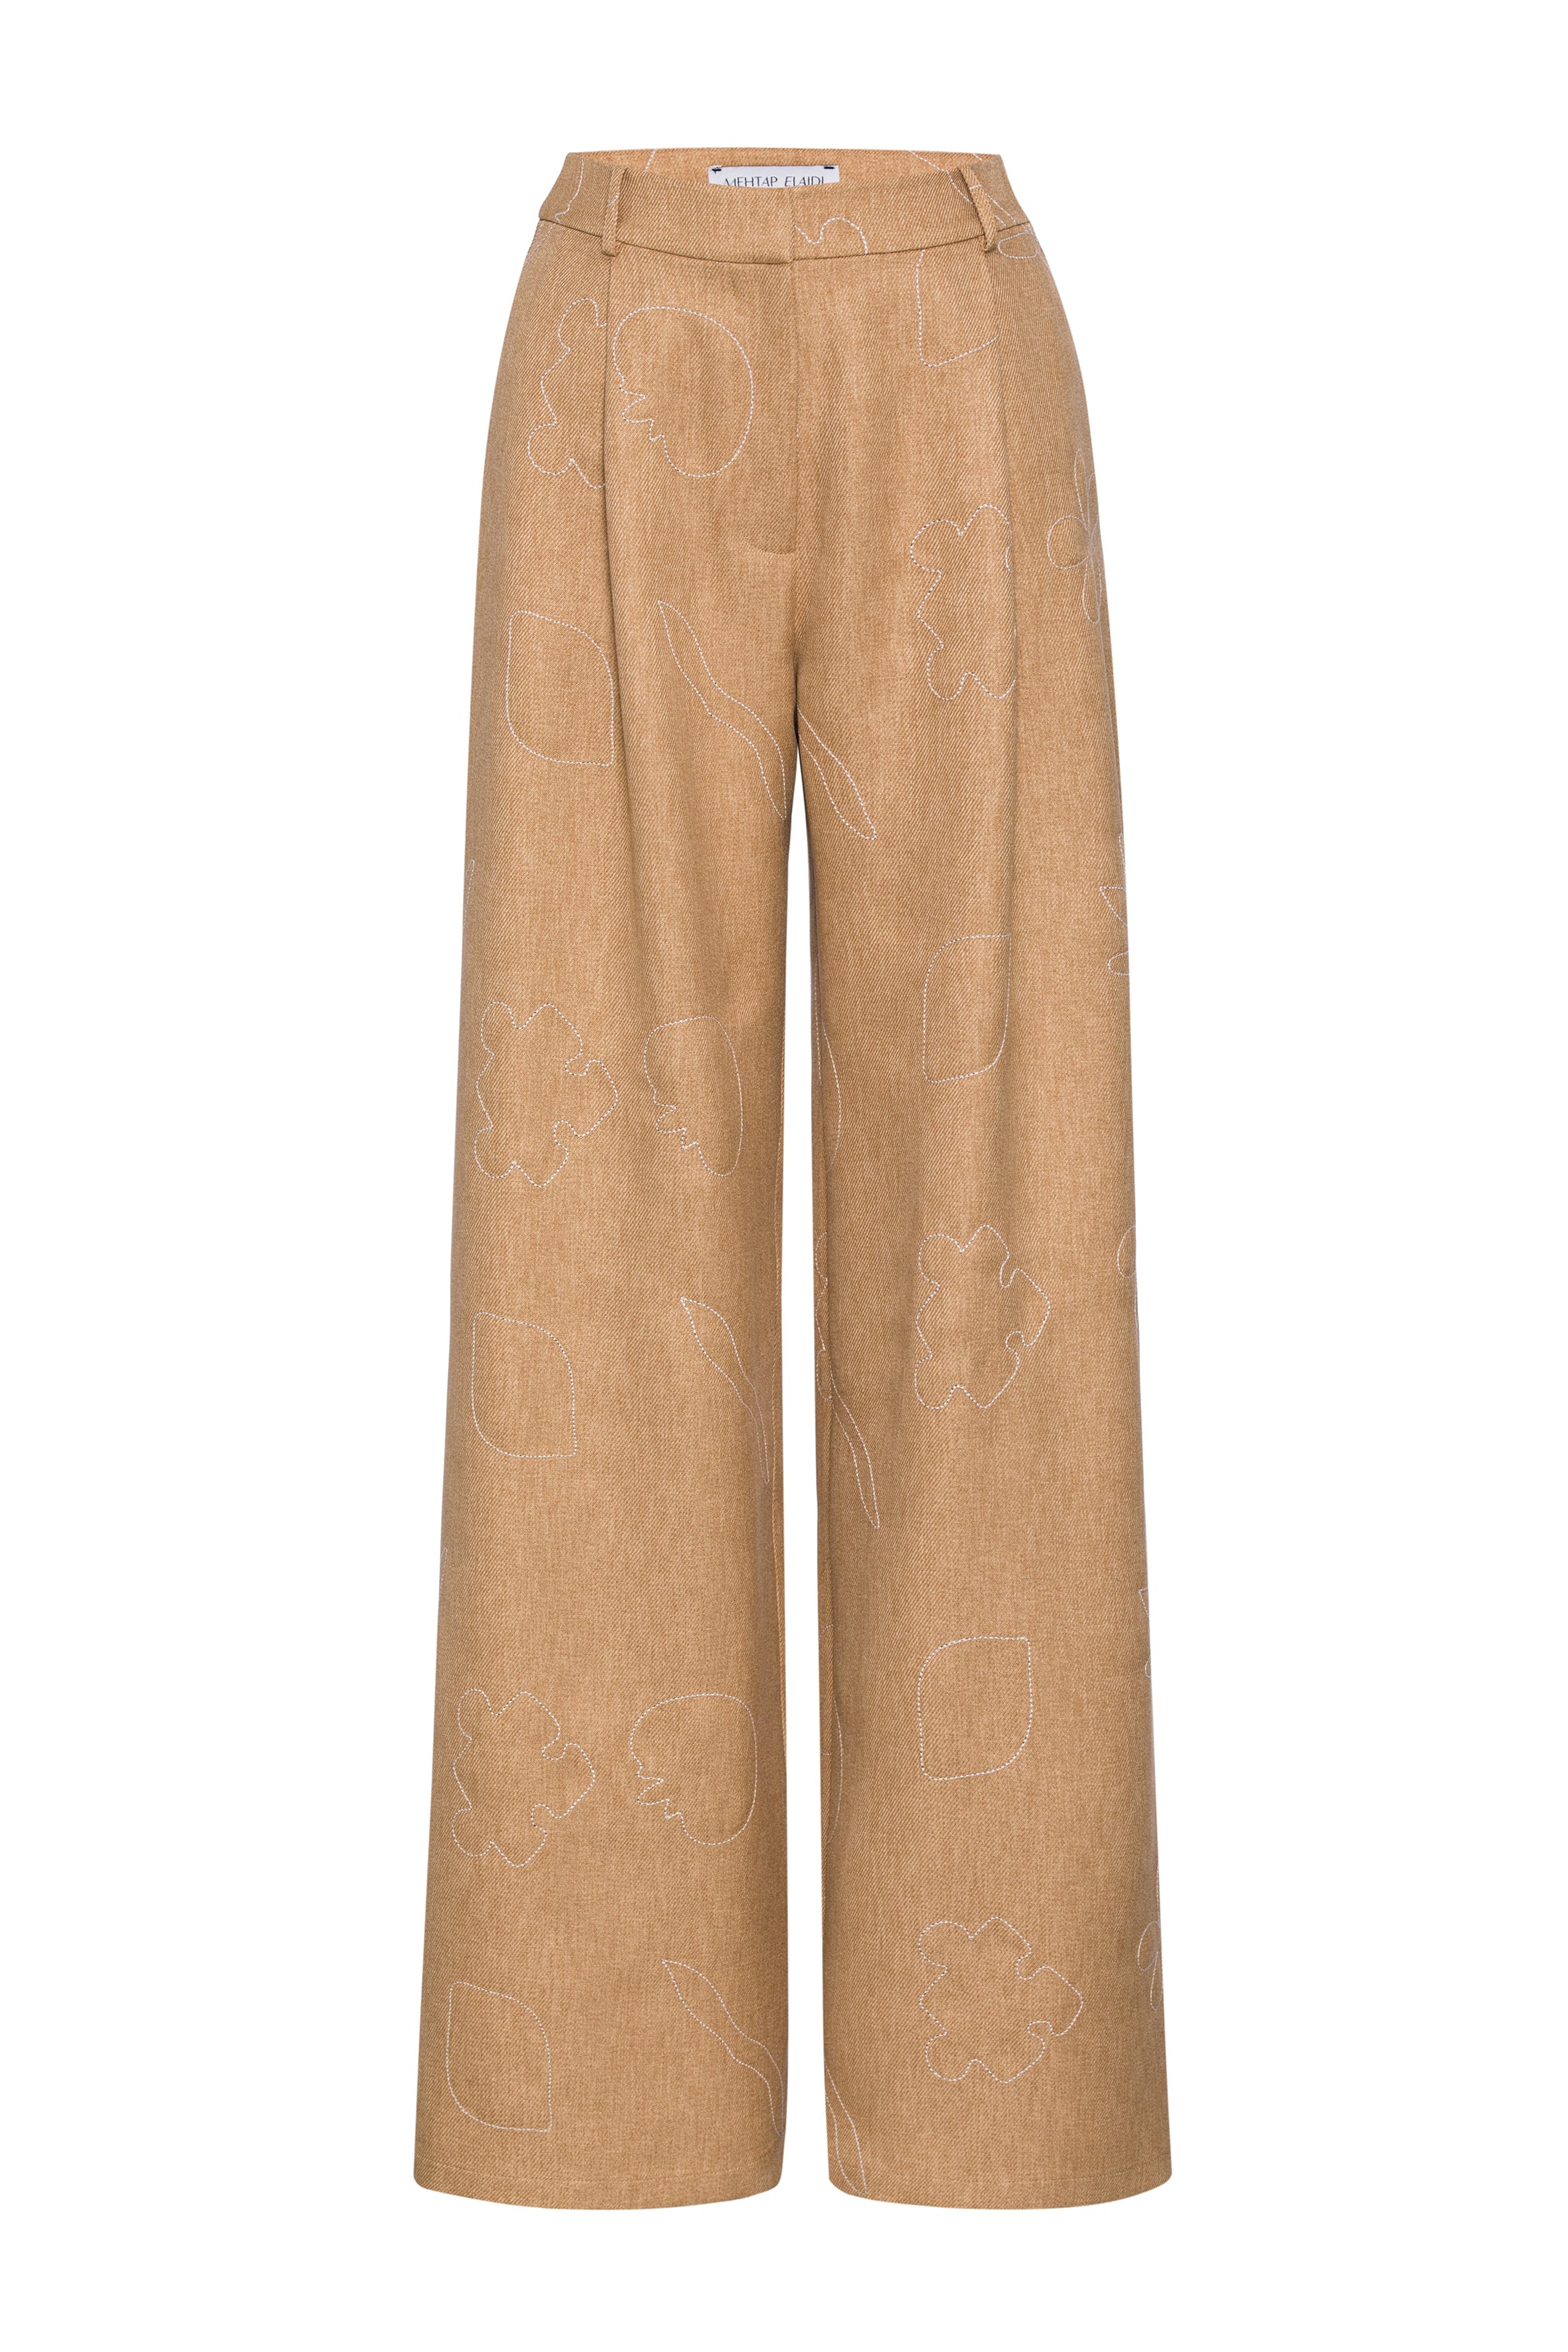 Puzzle Embroidered Pants